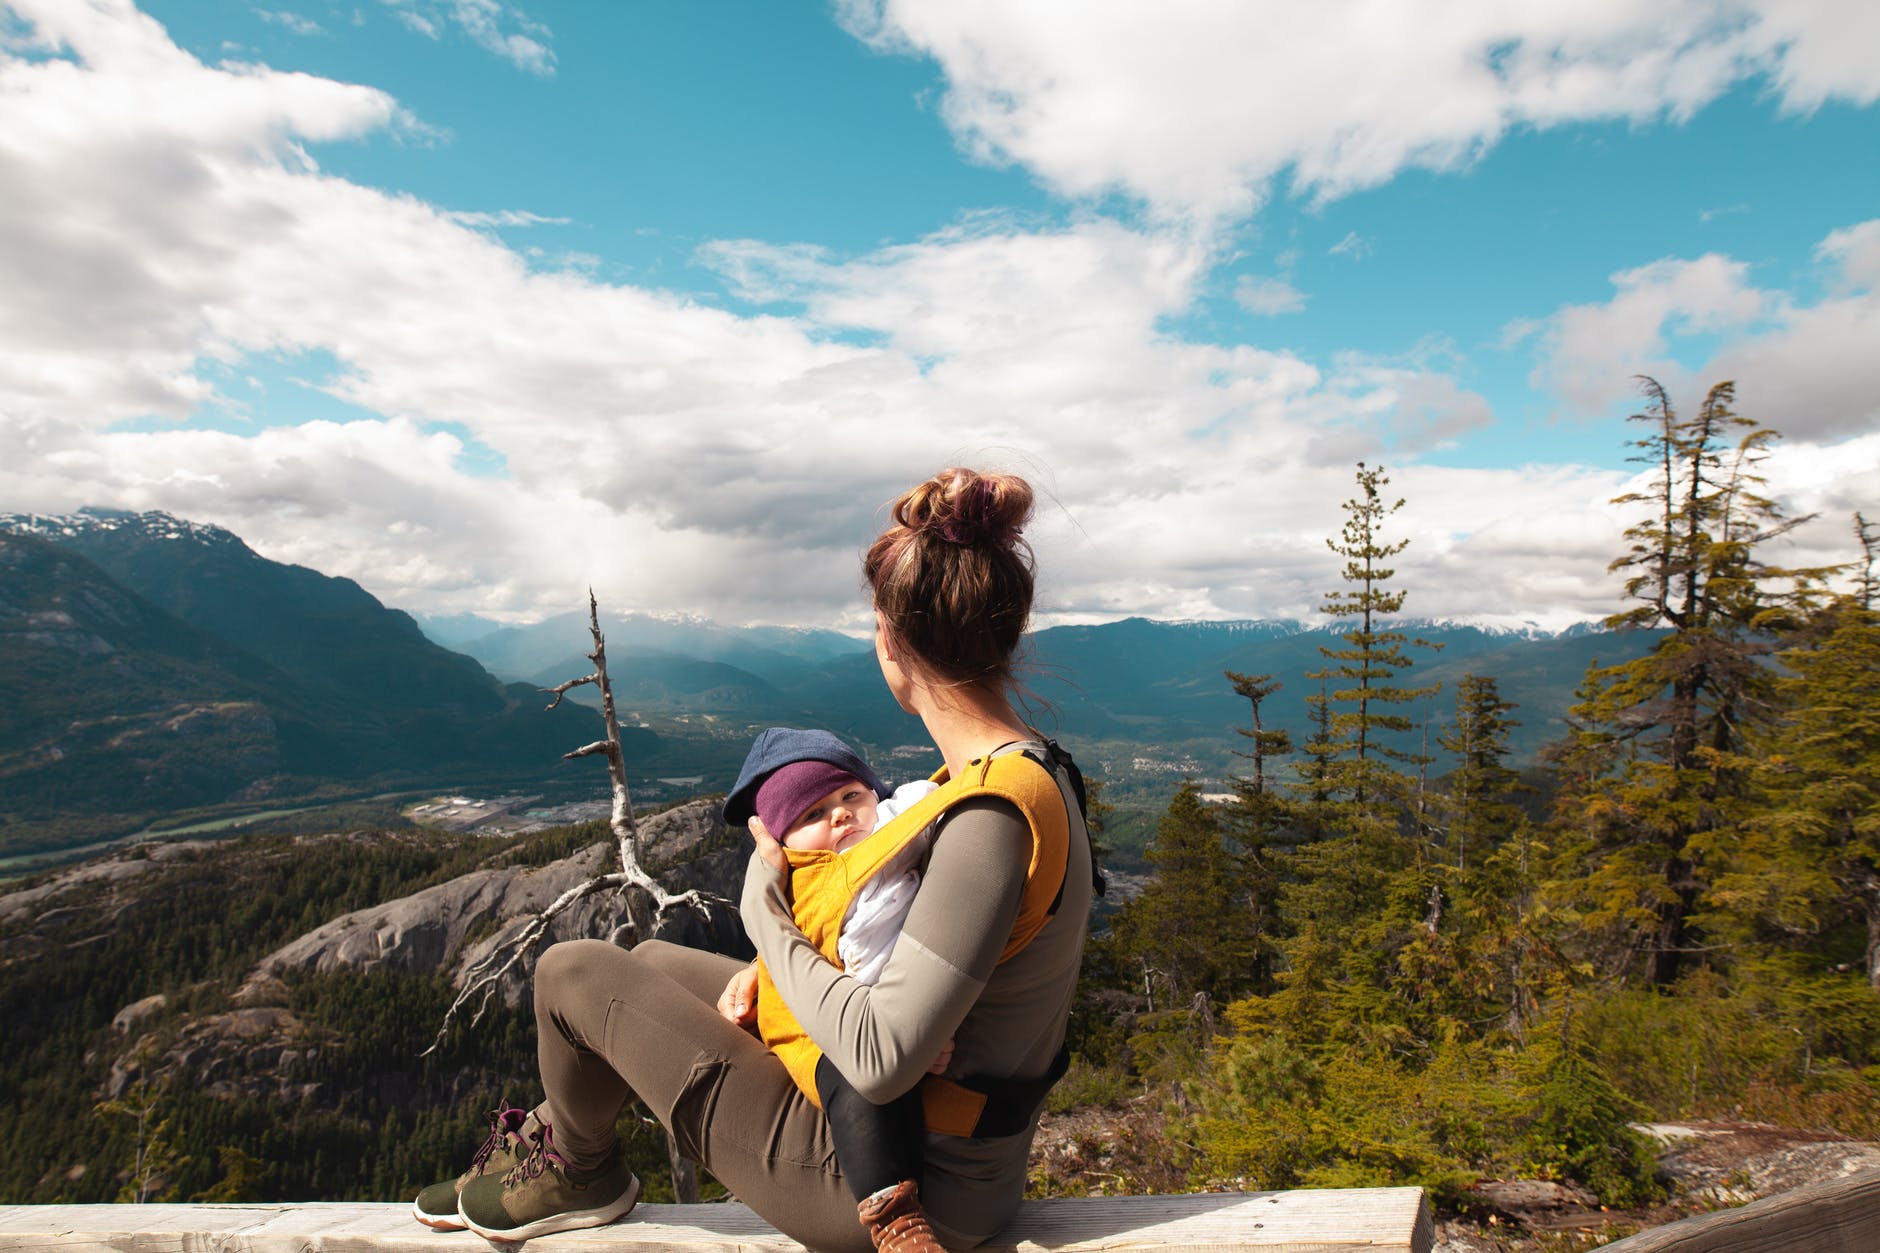 mother carrying her baby while looking at the nature scenery